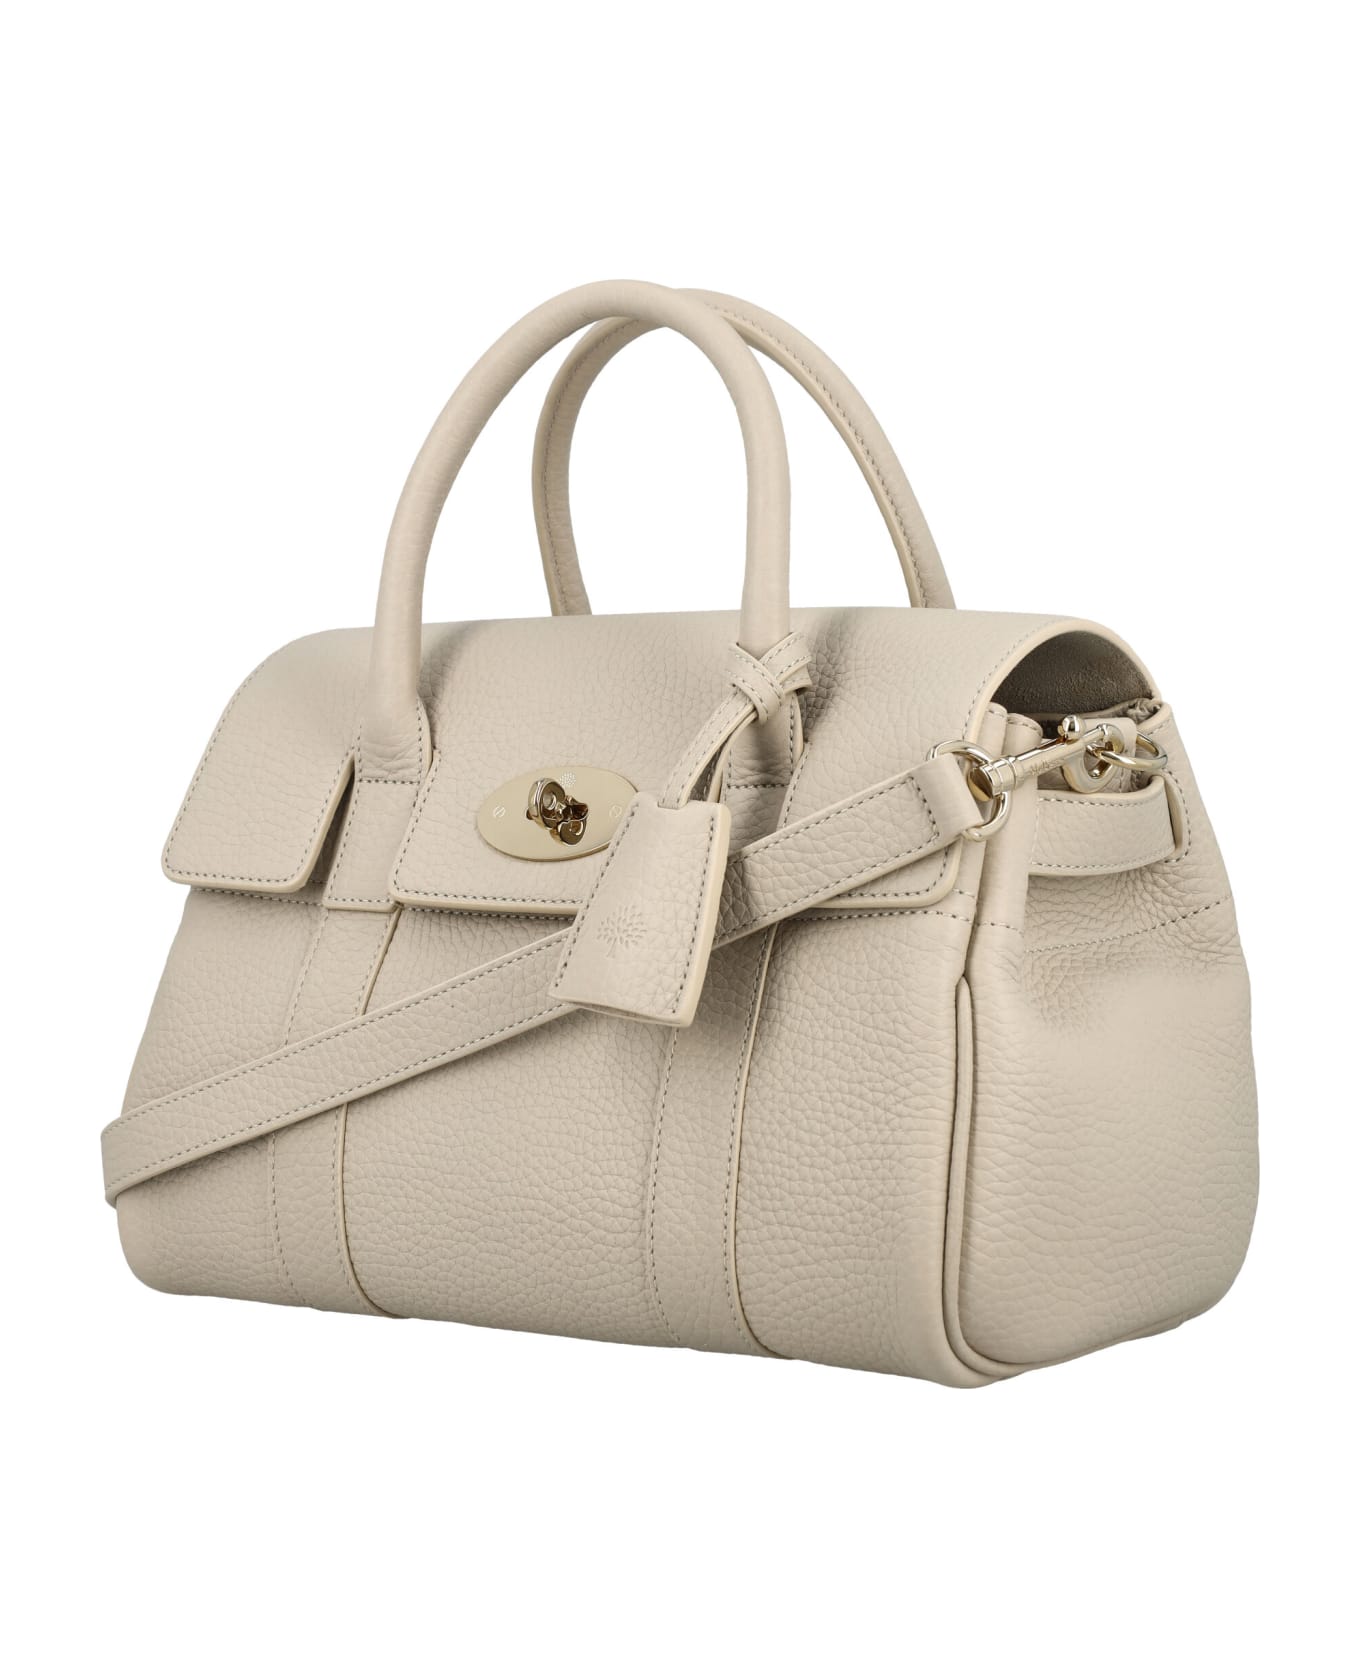 Mulberry Small Bayswater Satchel Hg - CHALK